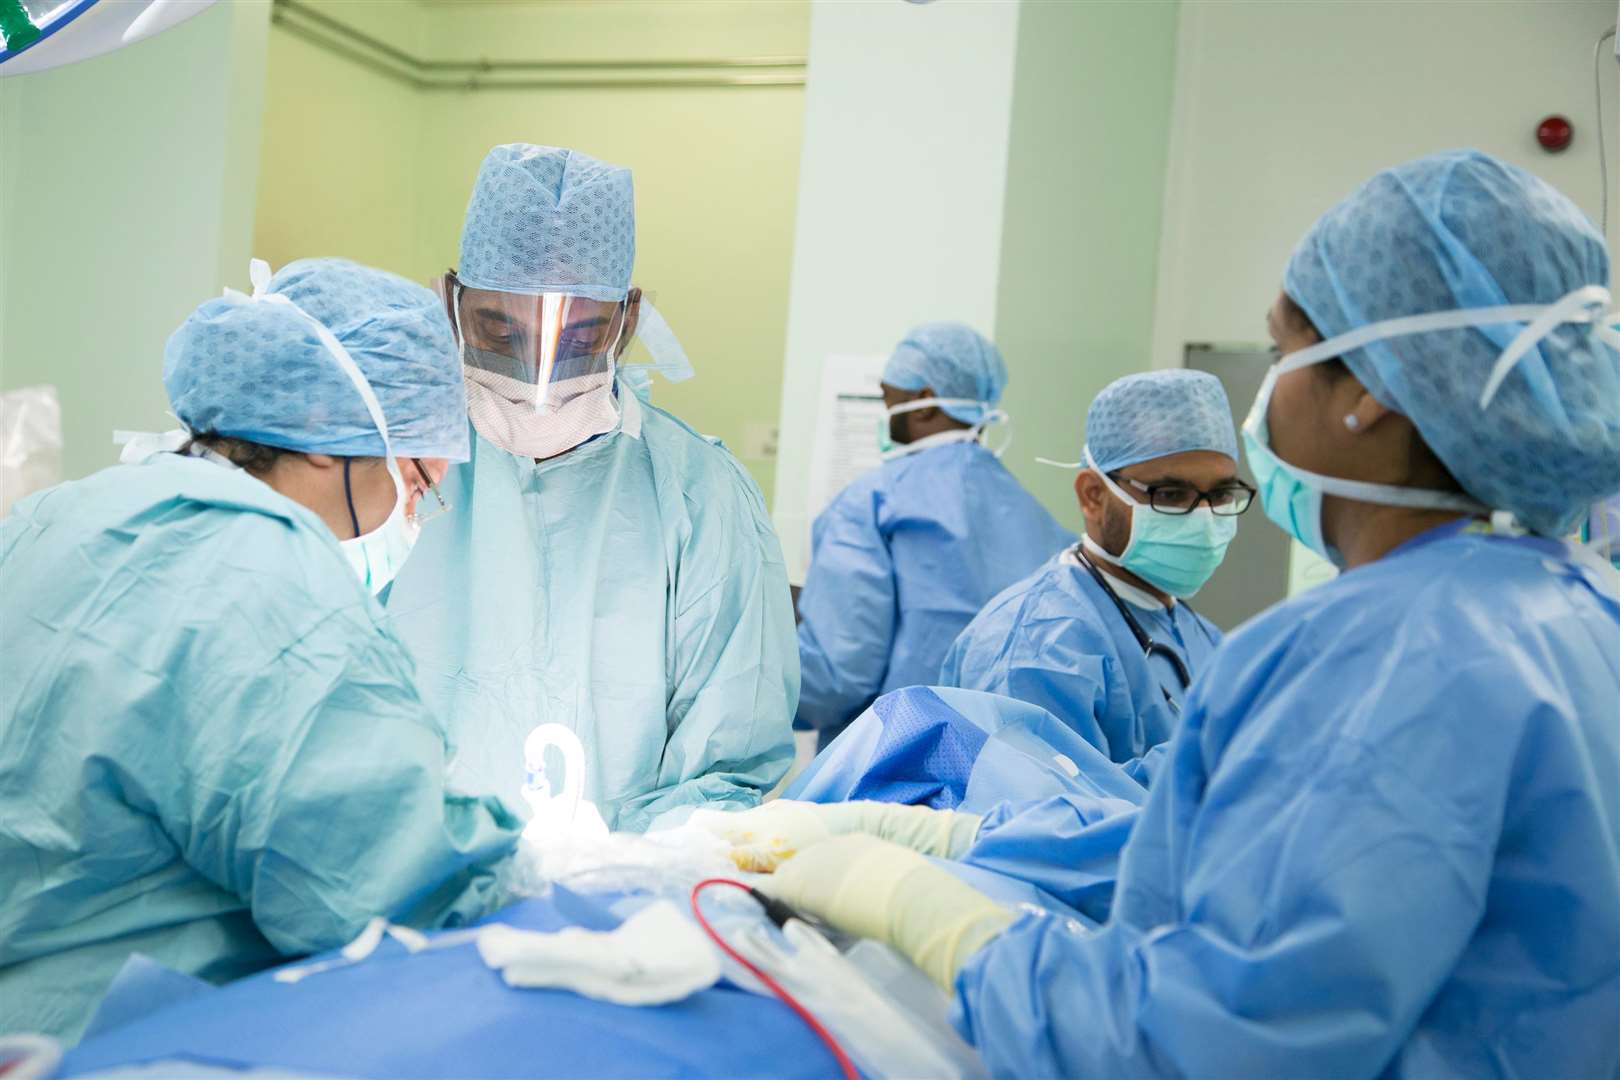 Surgery being carried out in an operating theatre at Medway Maritime Hospital